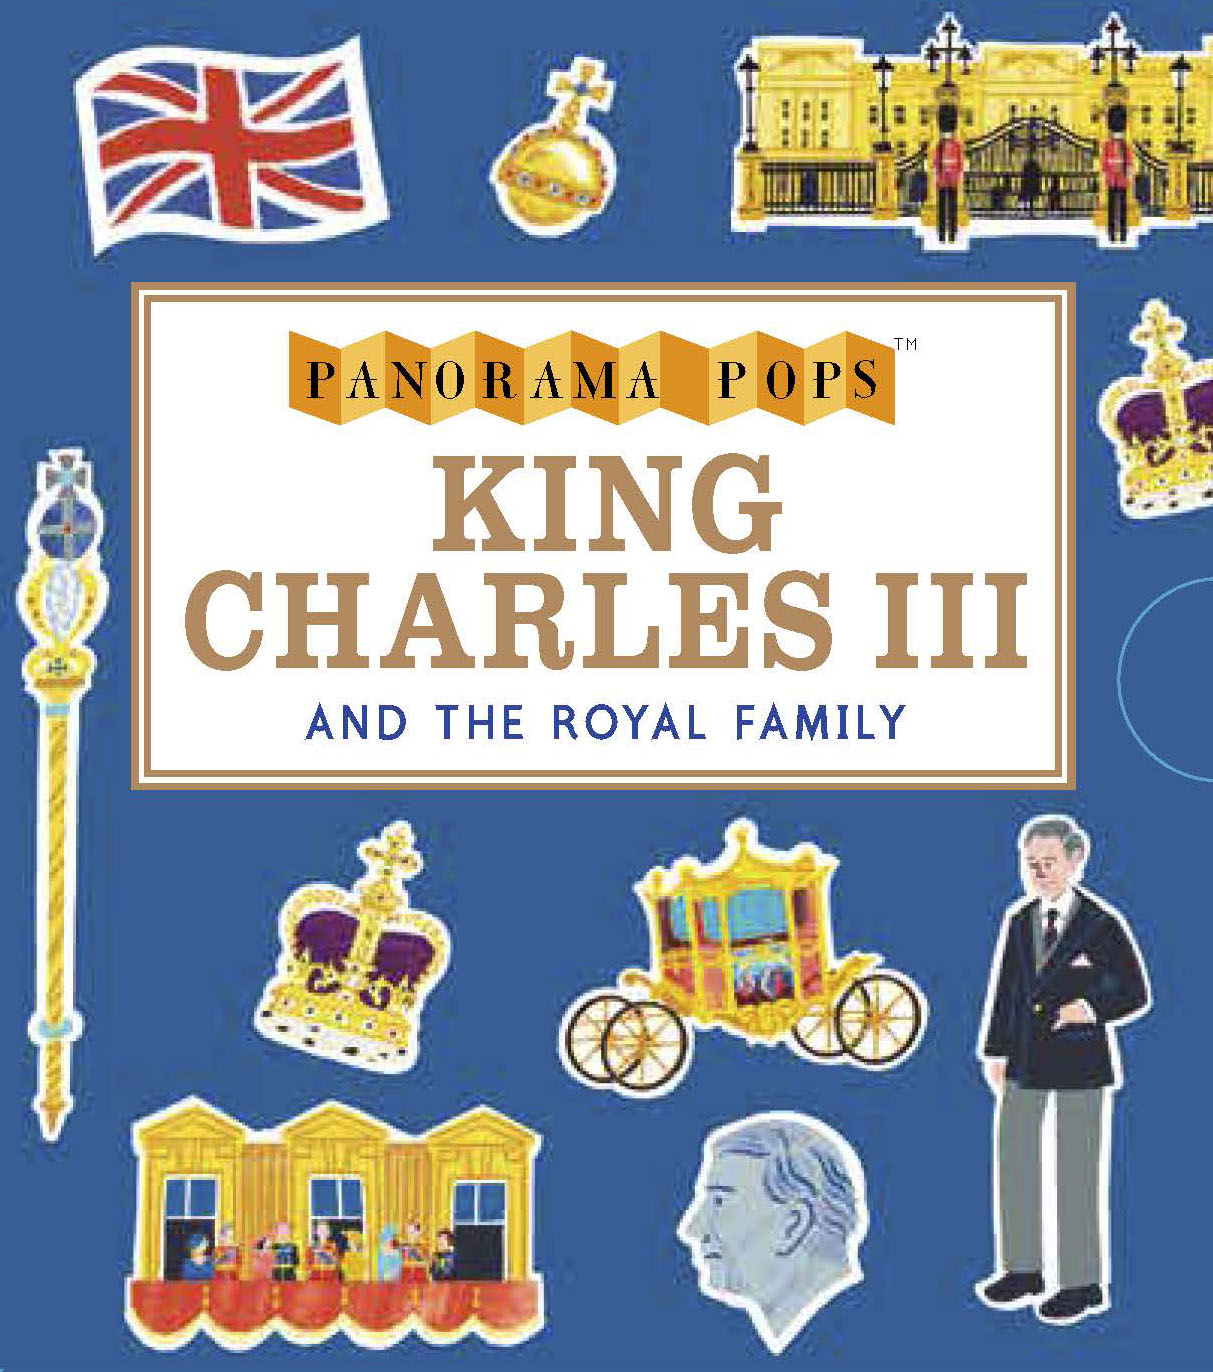 King-Charles-III-and-the-Royal-Family-Panorama-Pops